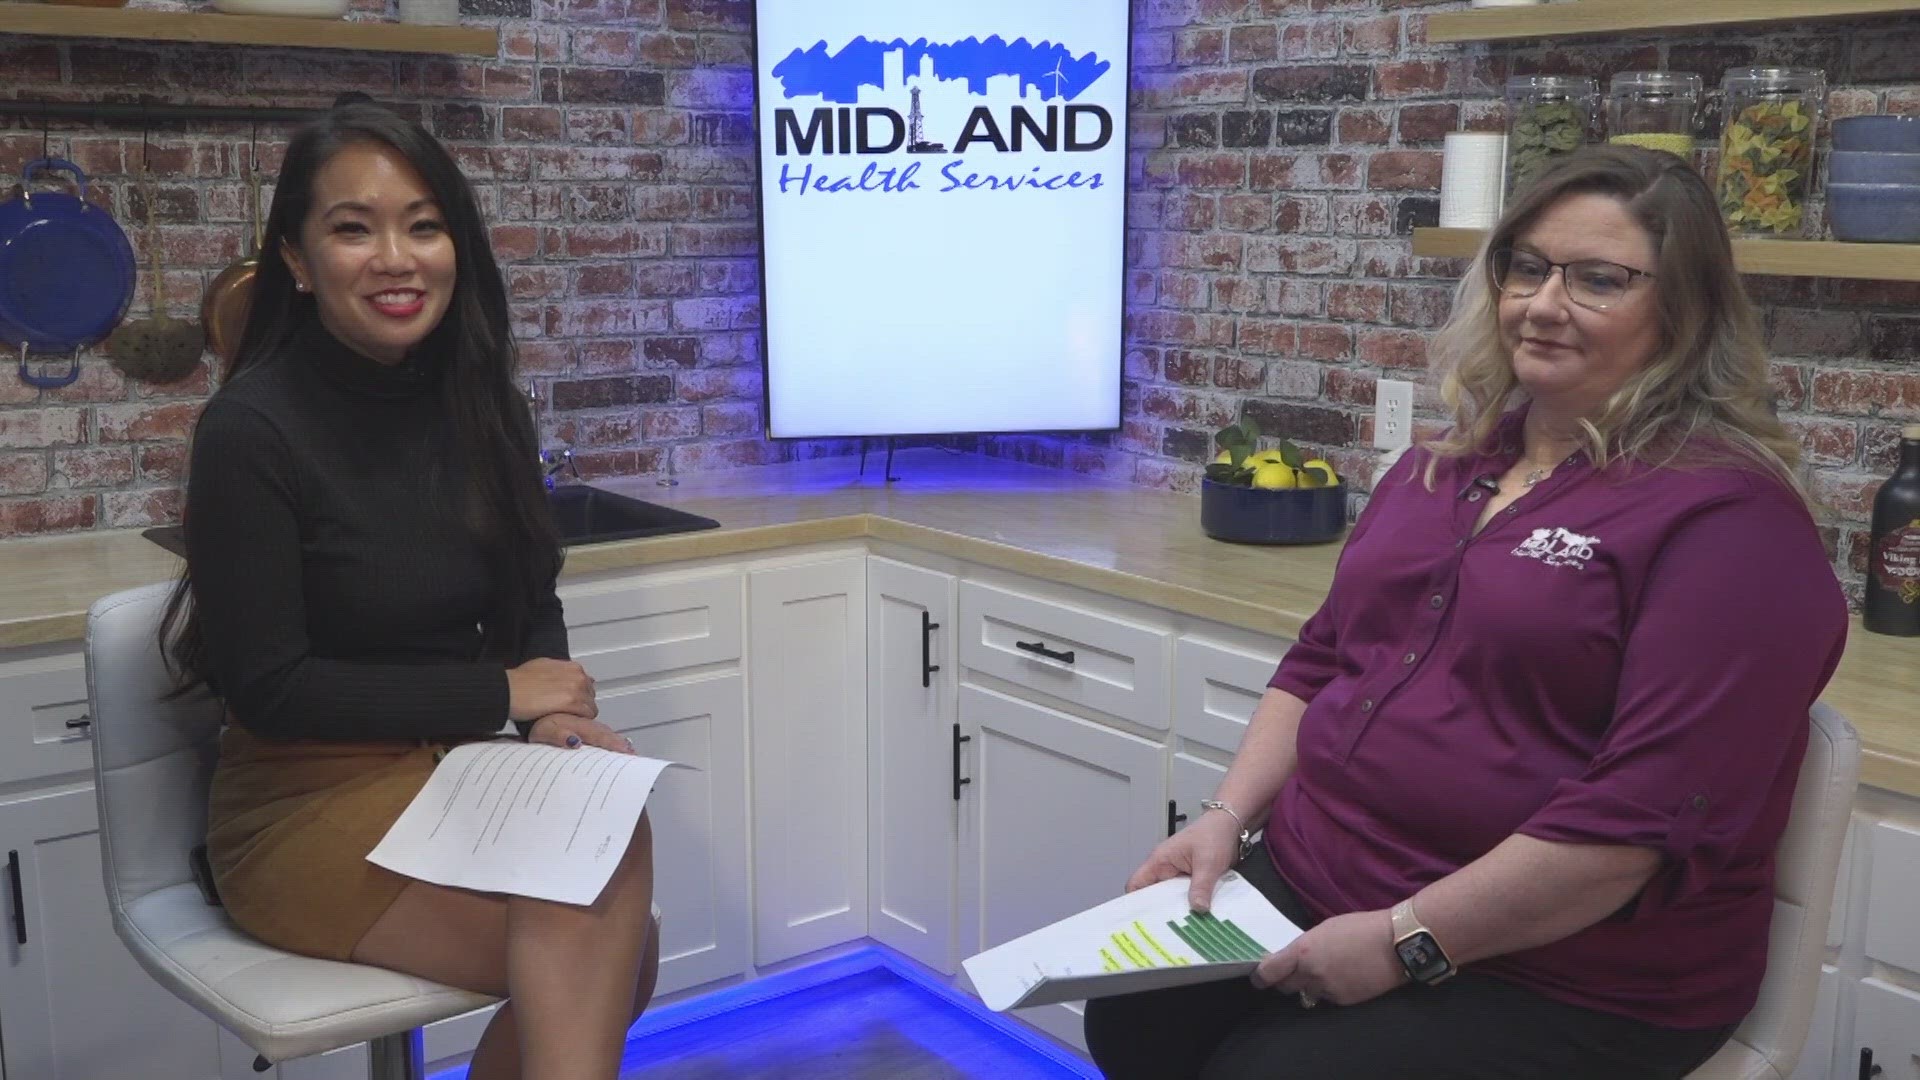 Wendi Lyle, BSN, RN, dives into what expecting mothers should know regarding food and physical health.